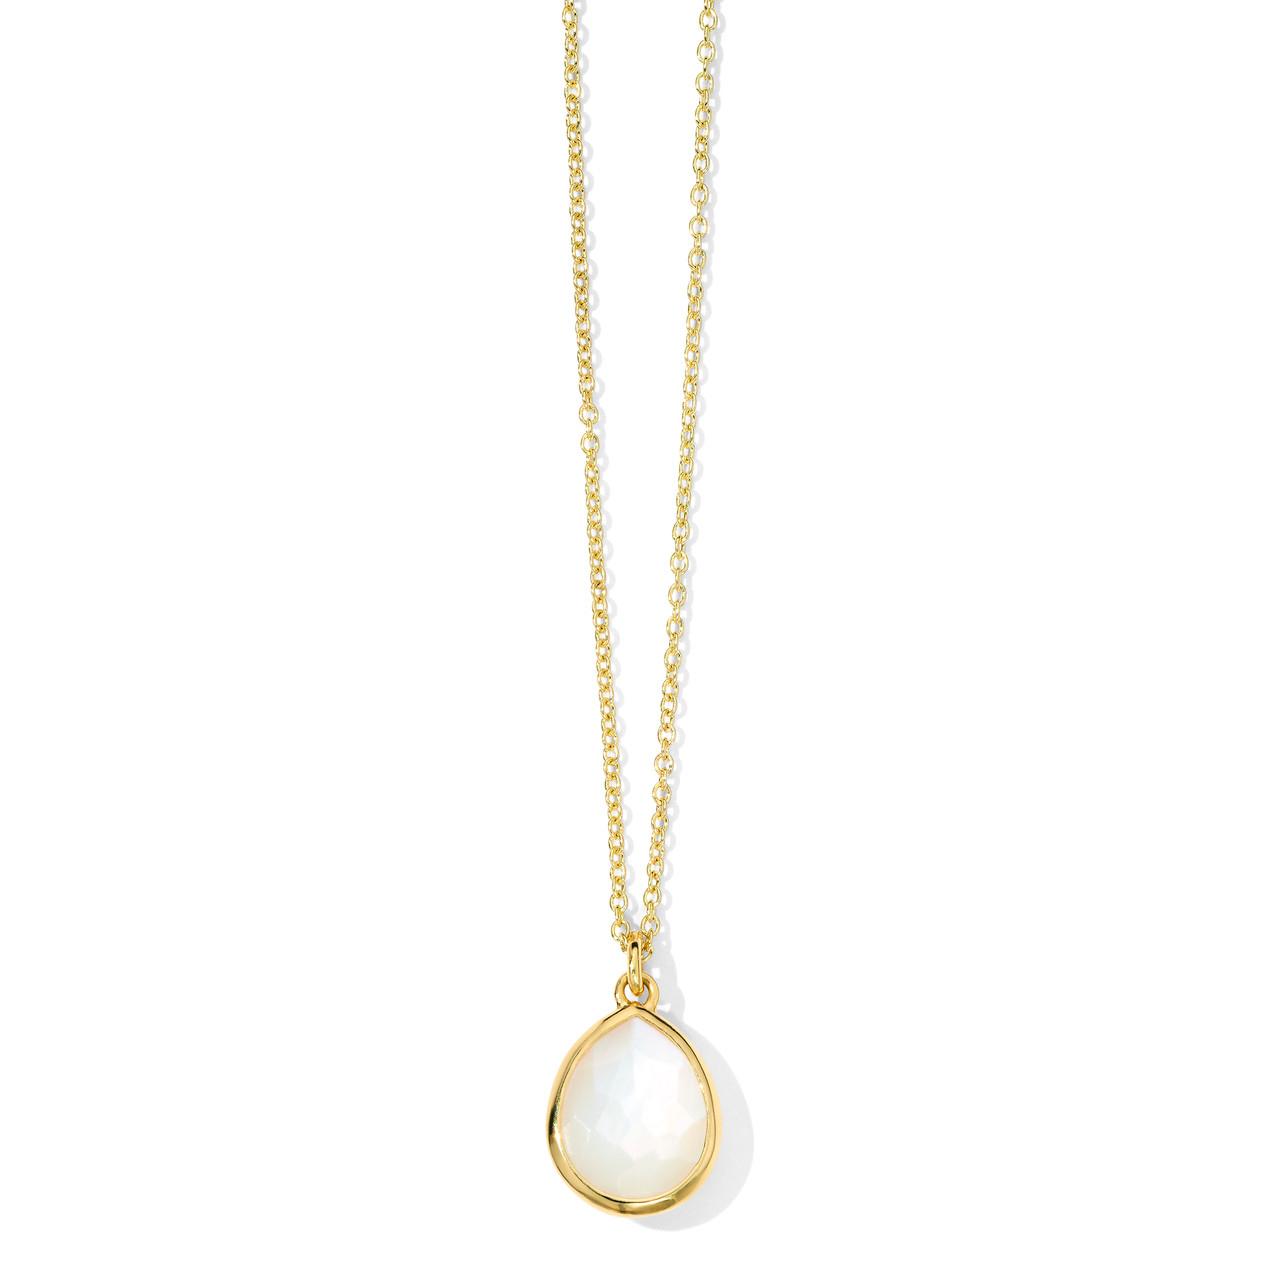 Ippolita Rock Candy Mini Teardrop Mother of Pearl Pendant Necklace in 18k Gold